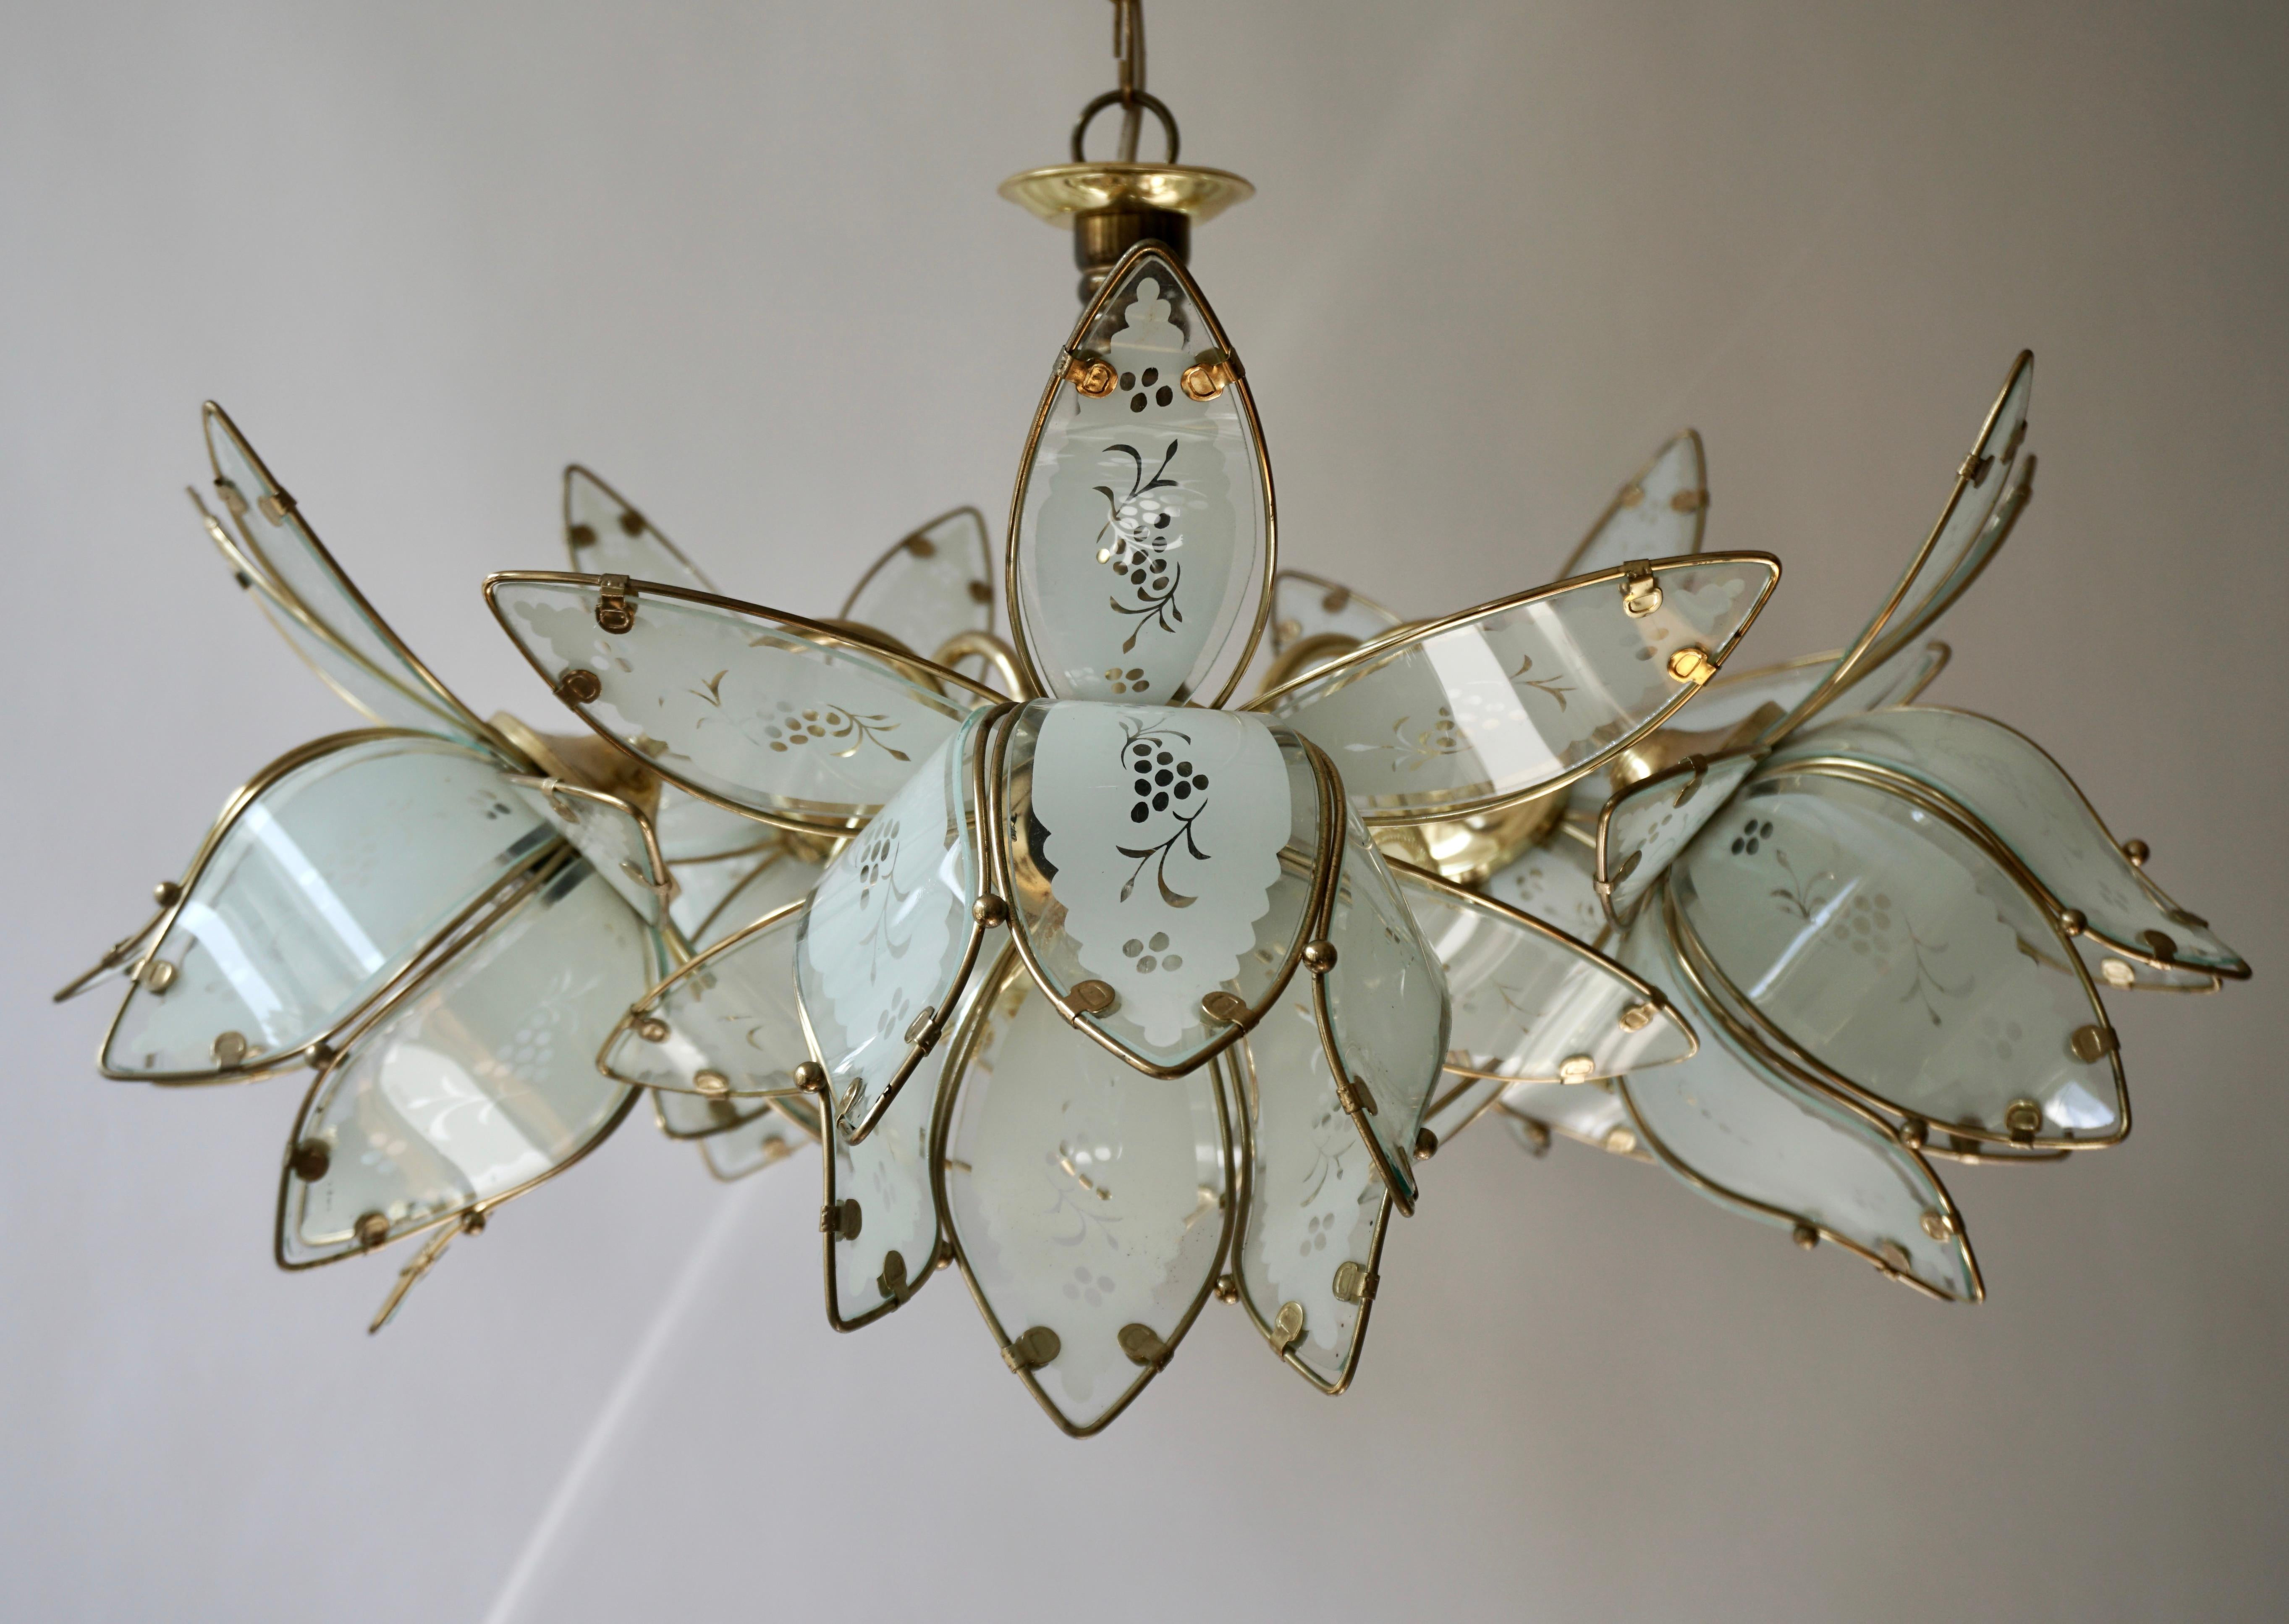 Five Italian chandeliers in brass with five white Murano glass flowers.

Measures: Diameter 26.7 inch - 68 cm.
Height fixture 15.7 inch - 40 cm.
Total height including the chain and canopy is 35.4 inch - 100 cm.
Please note that price is per item